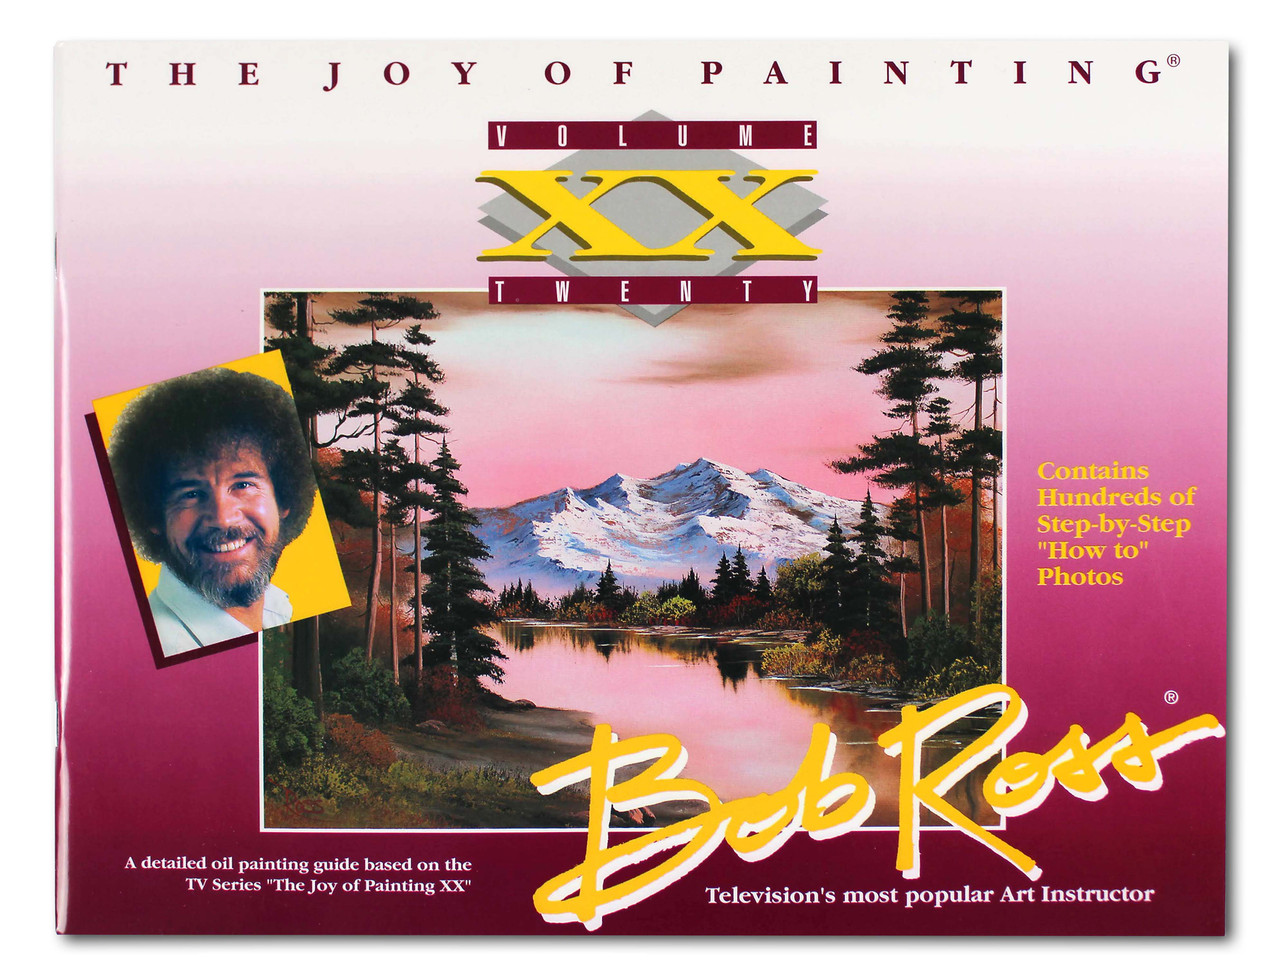 Watch Every Episode of Bob Ross's “The Joy of Painting” for Free